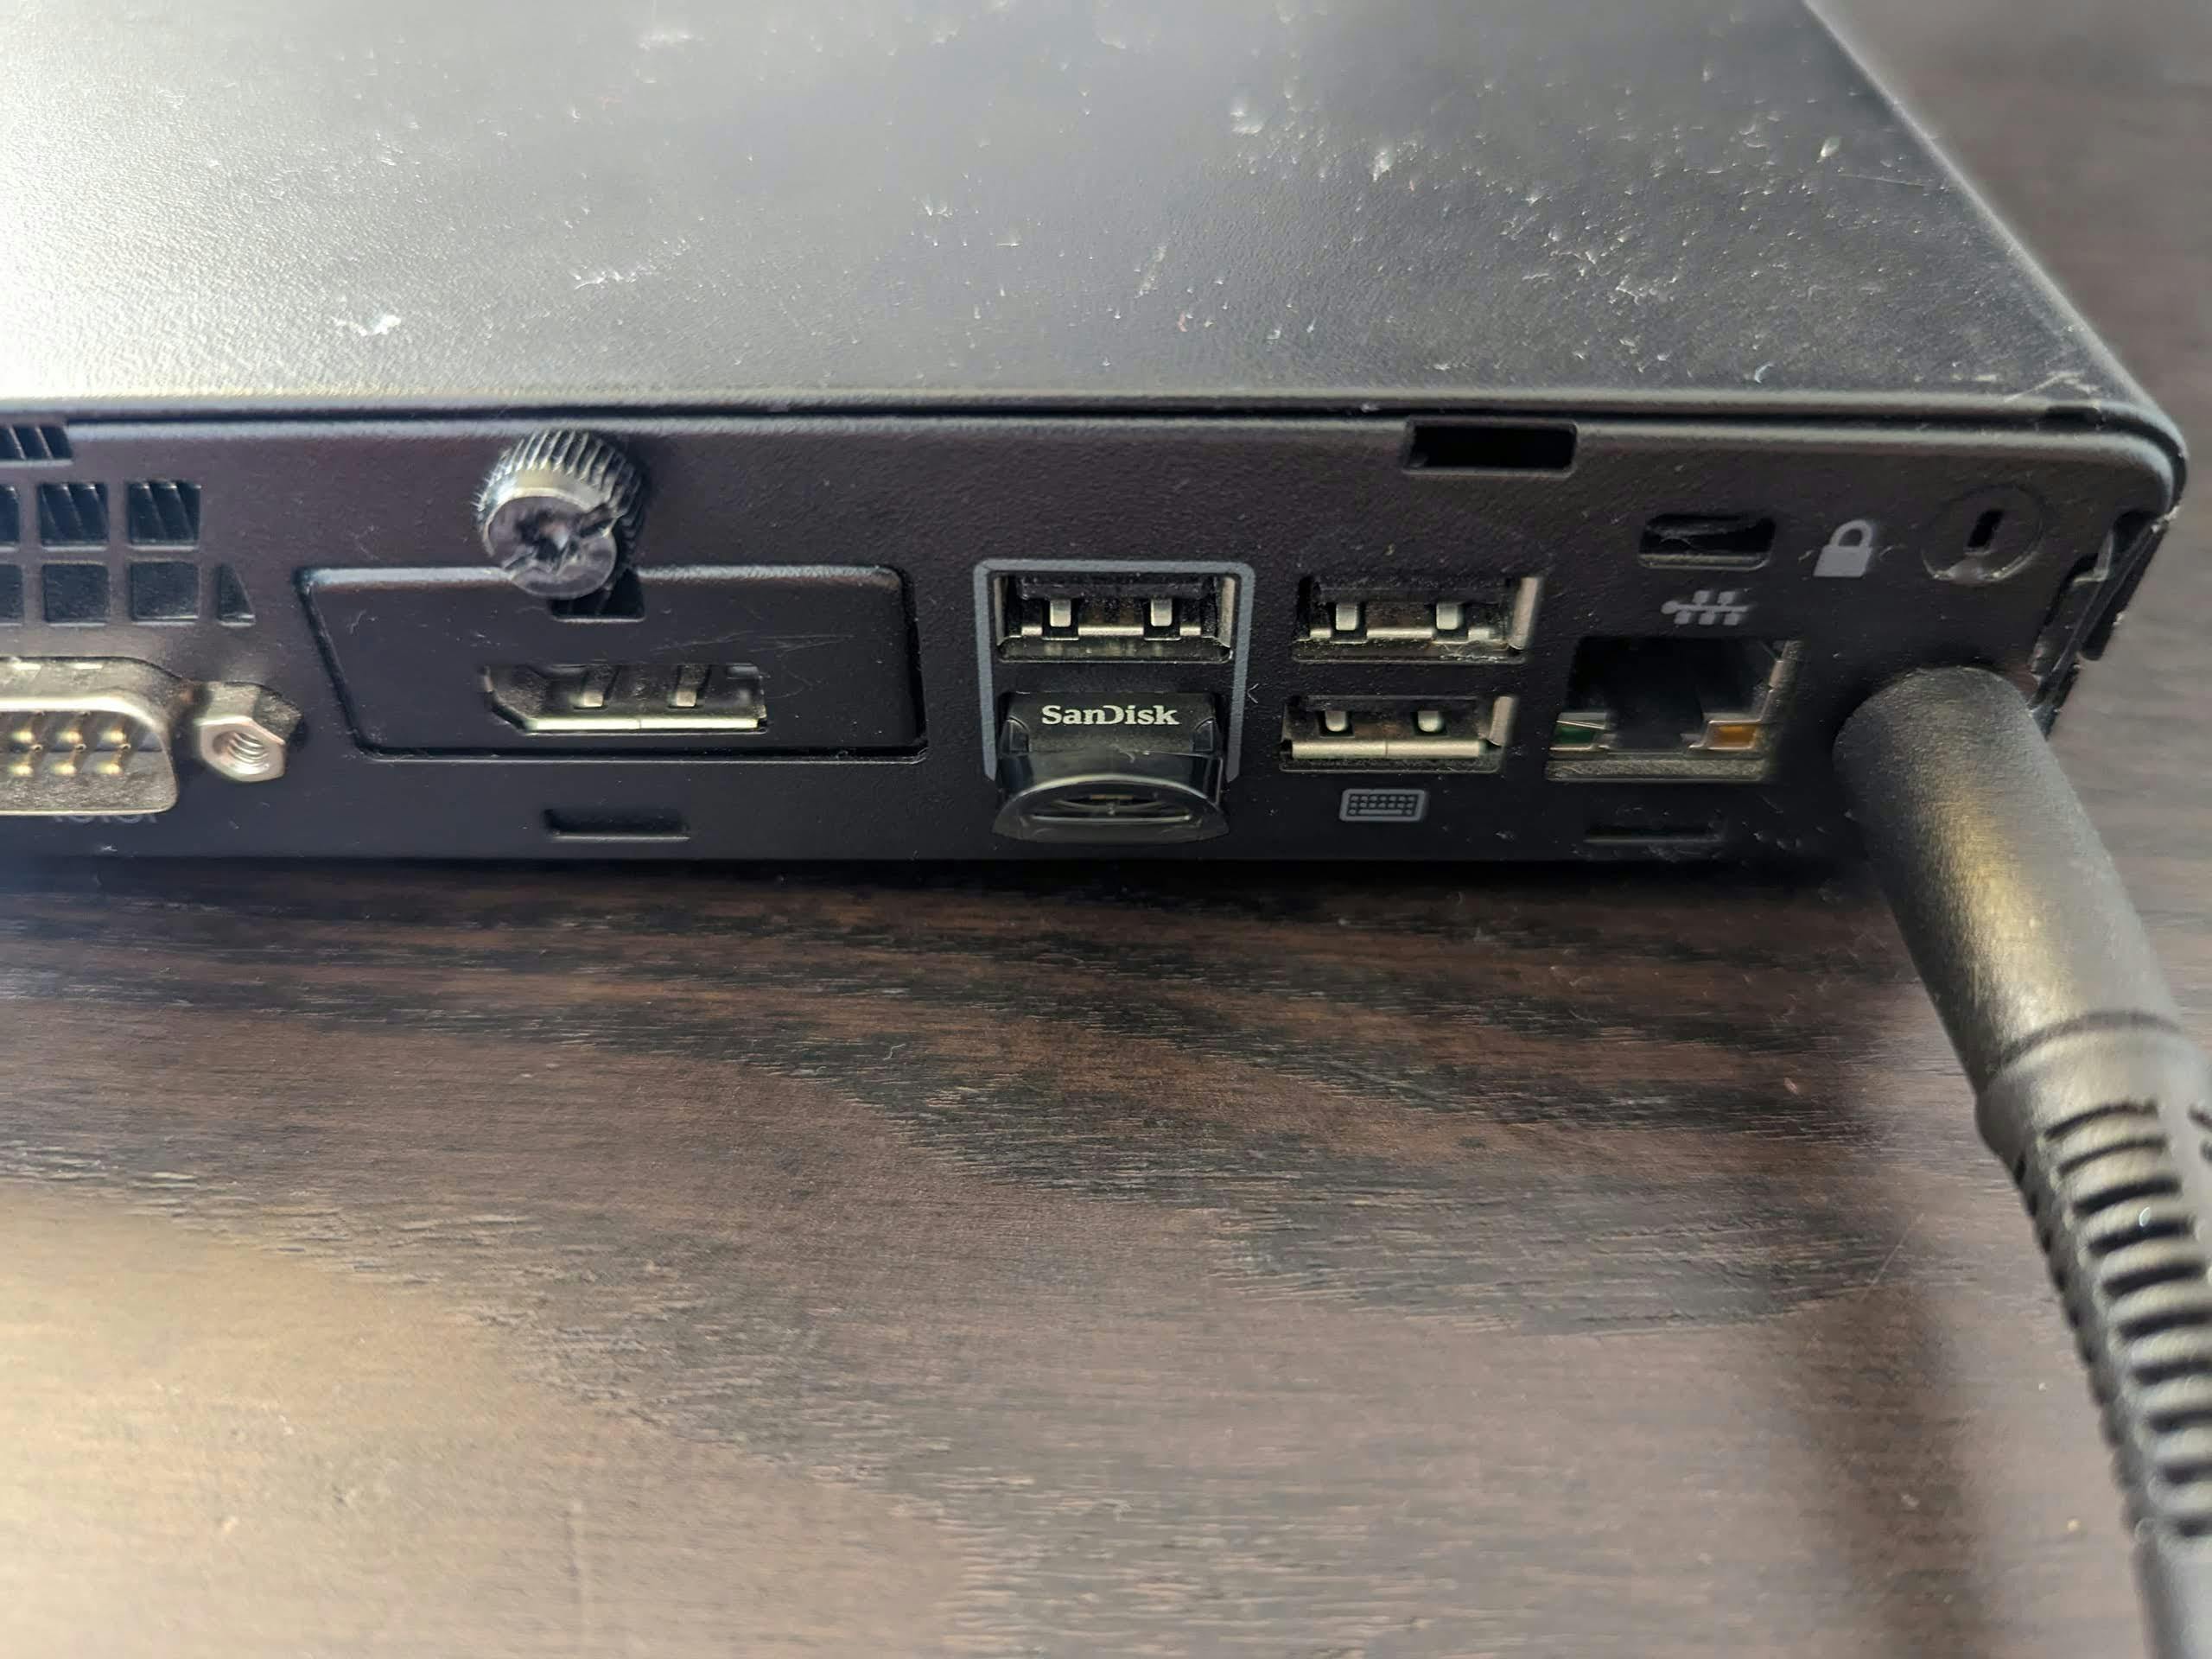 Tiny flash drive plugged in a USB port